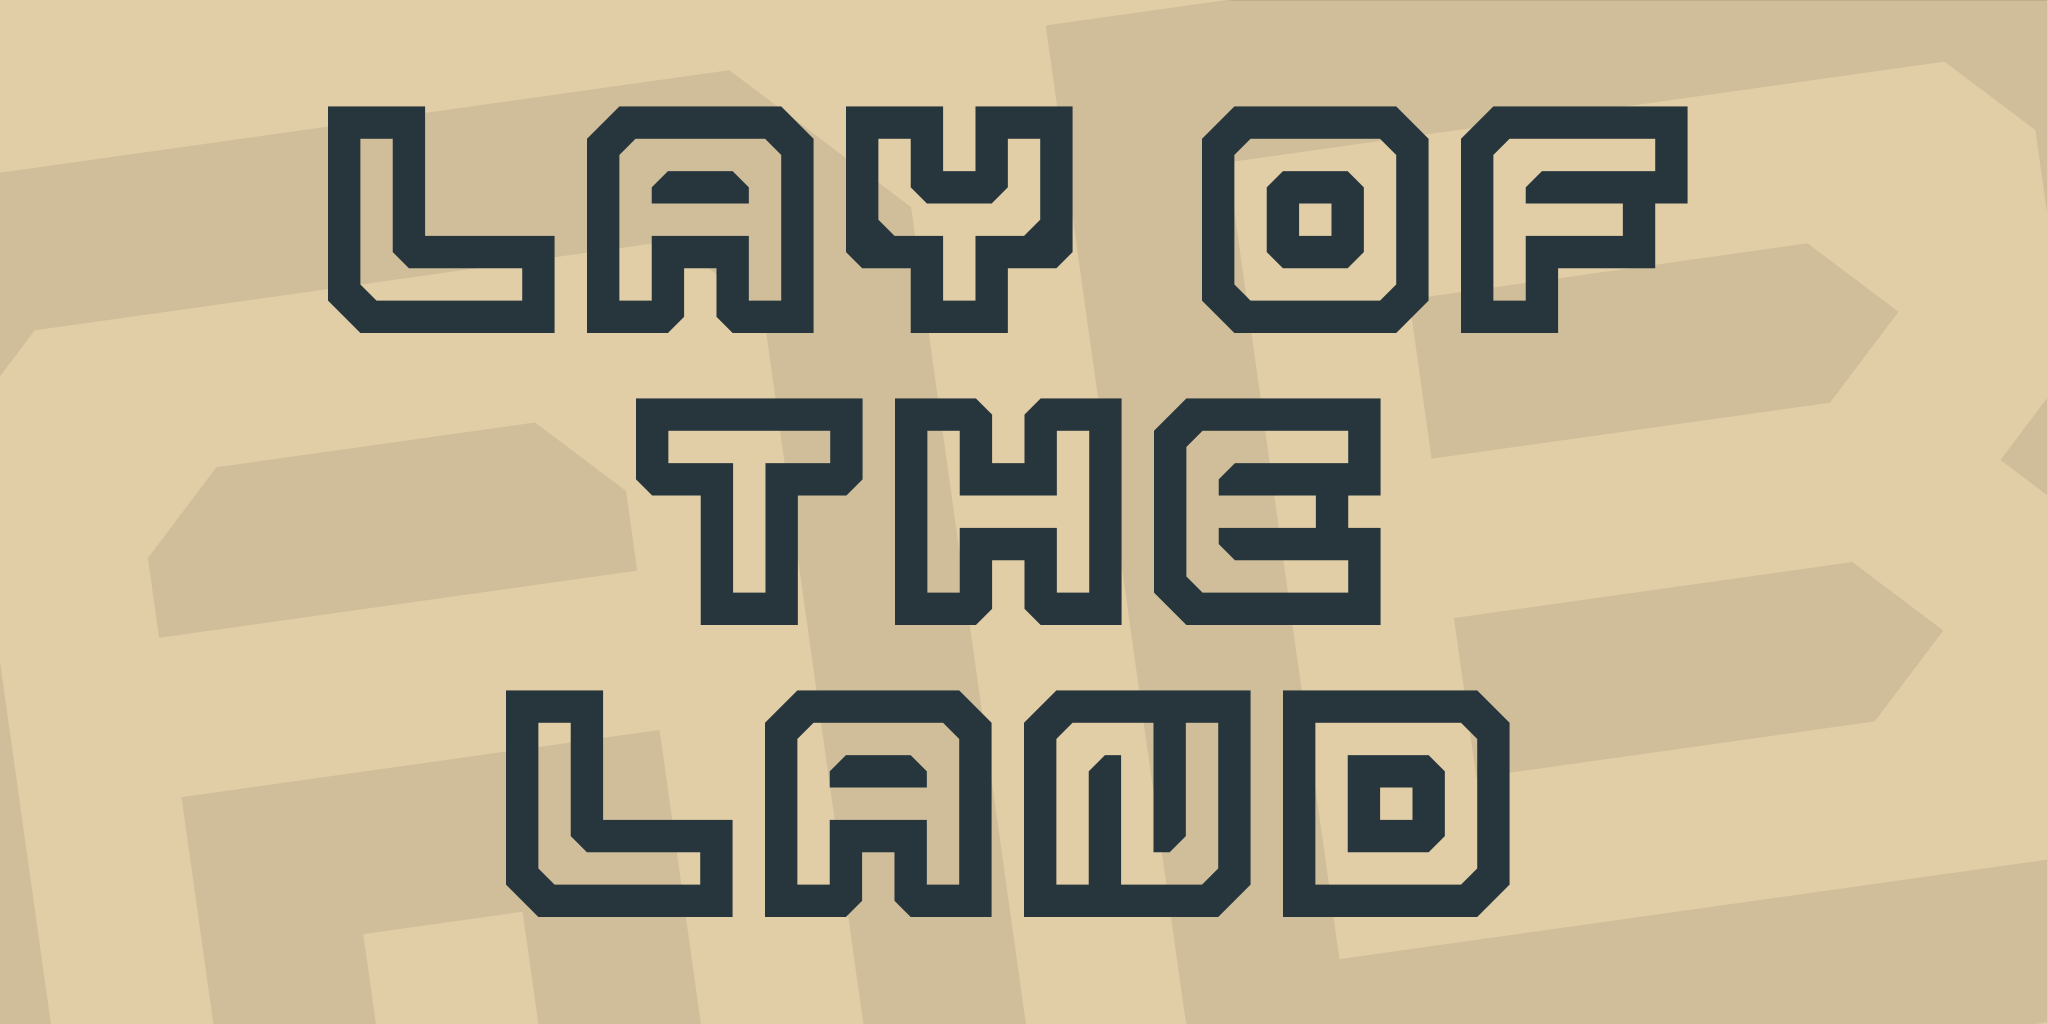 Lay Of The Land